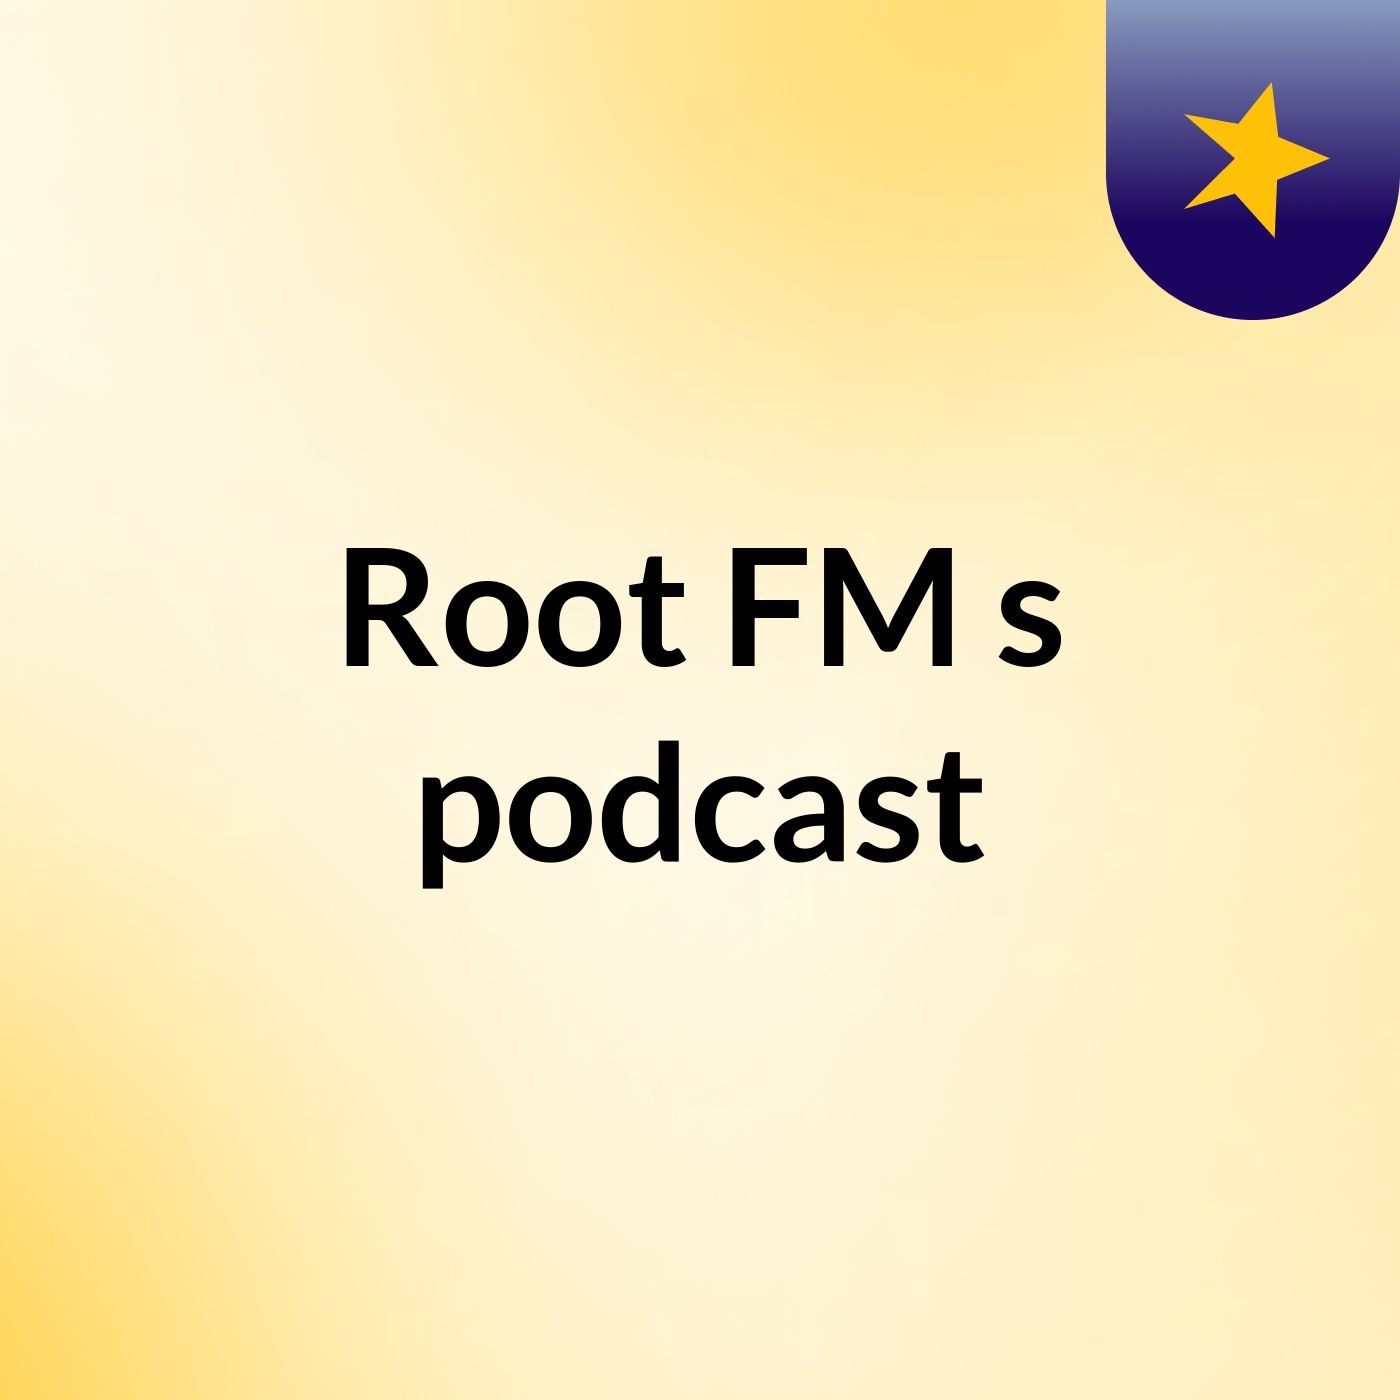 Episode 5 - Root FM's podcast